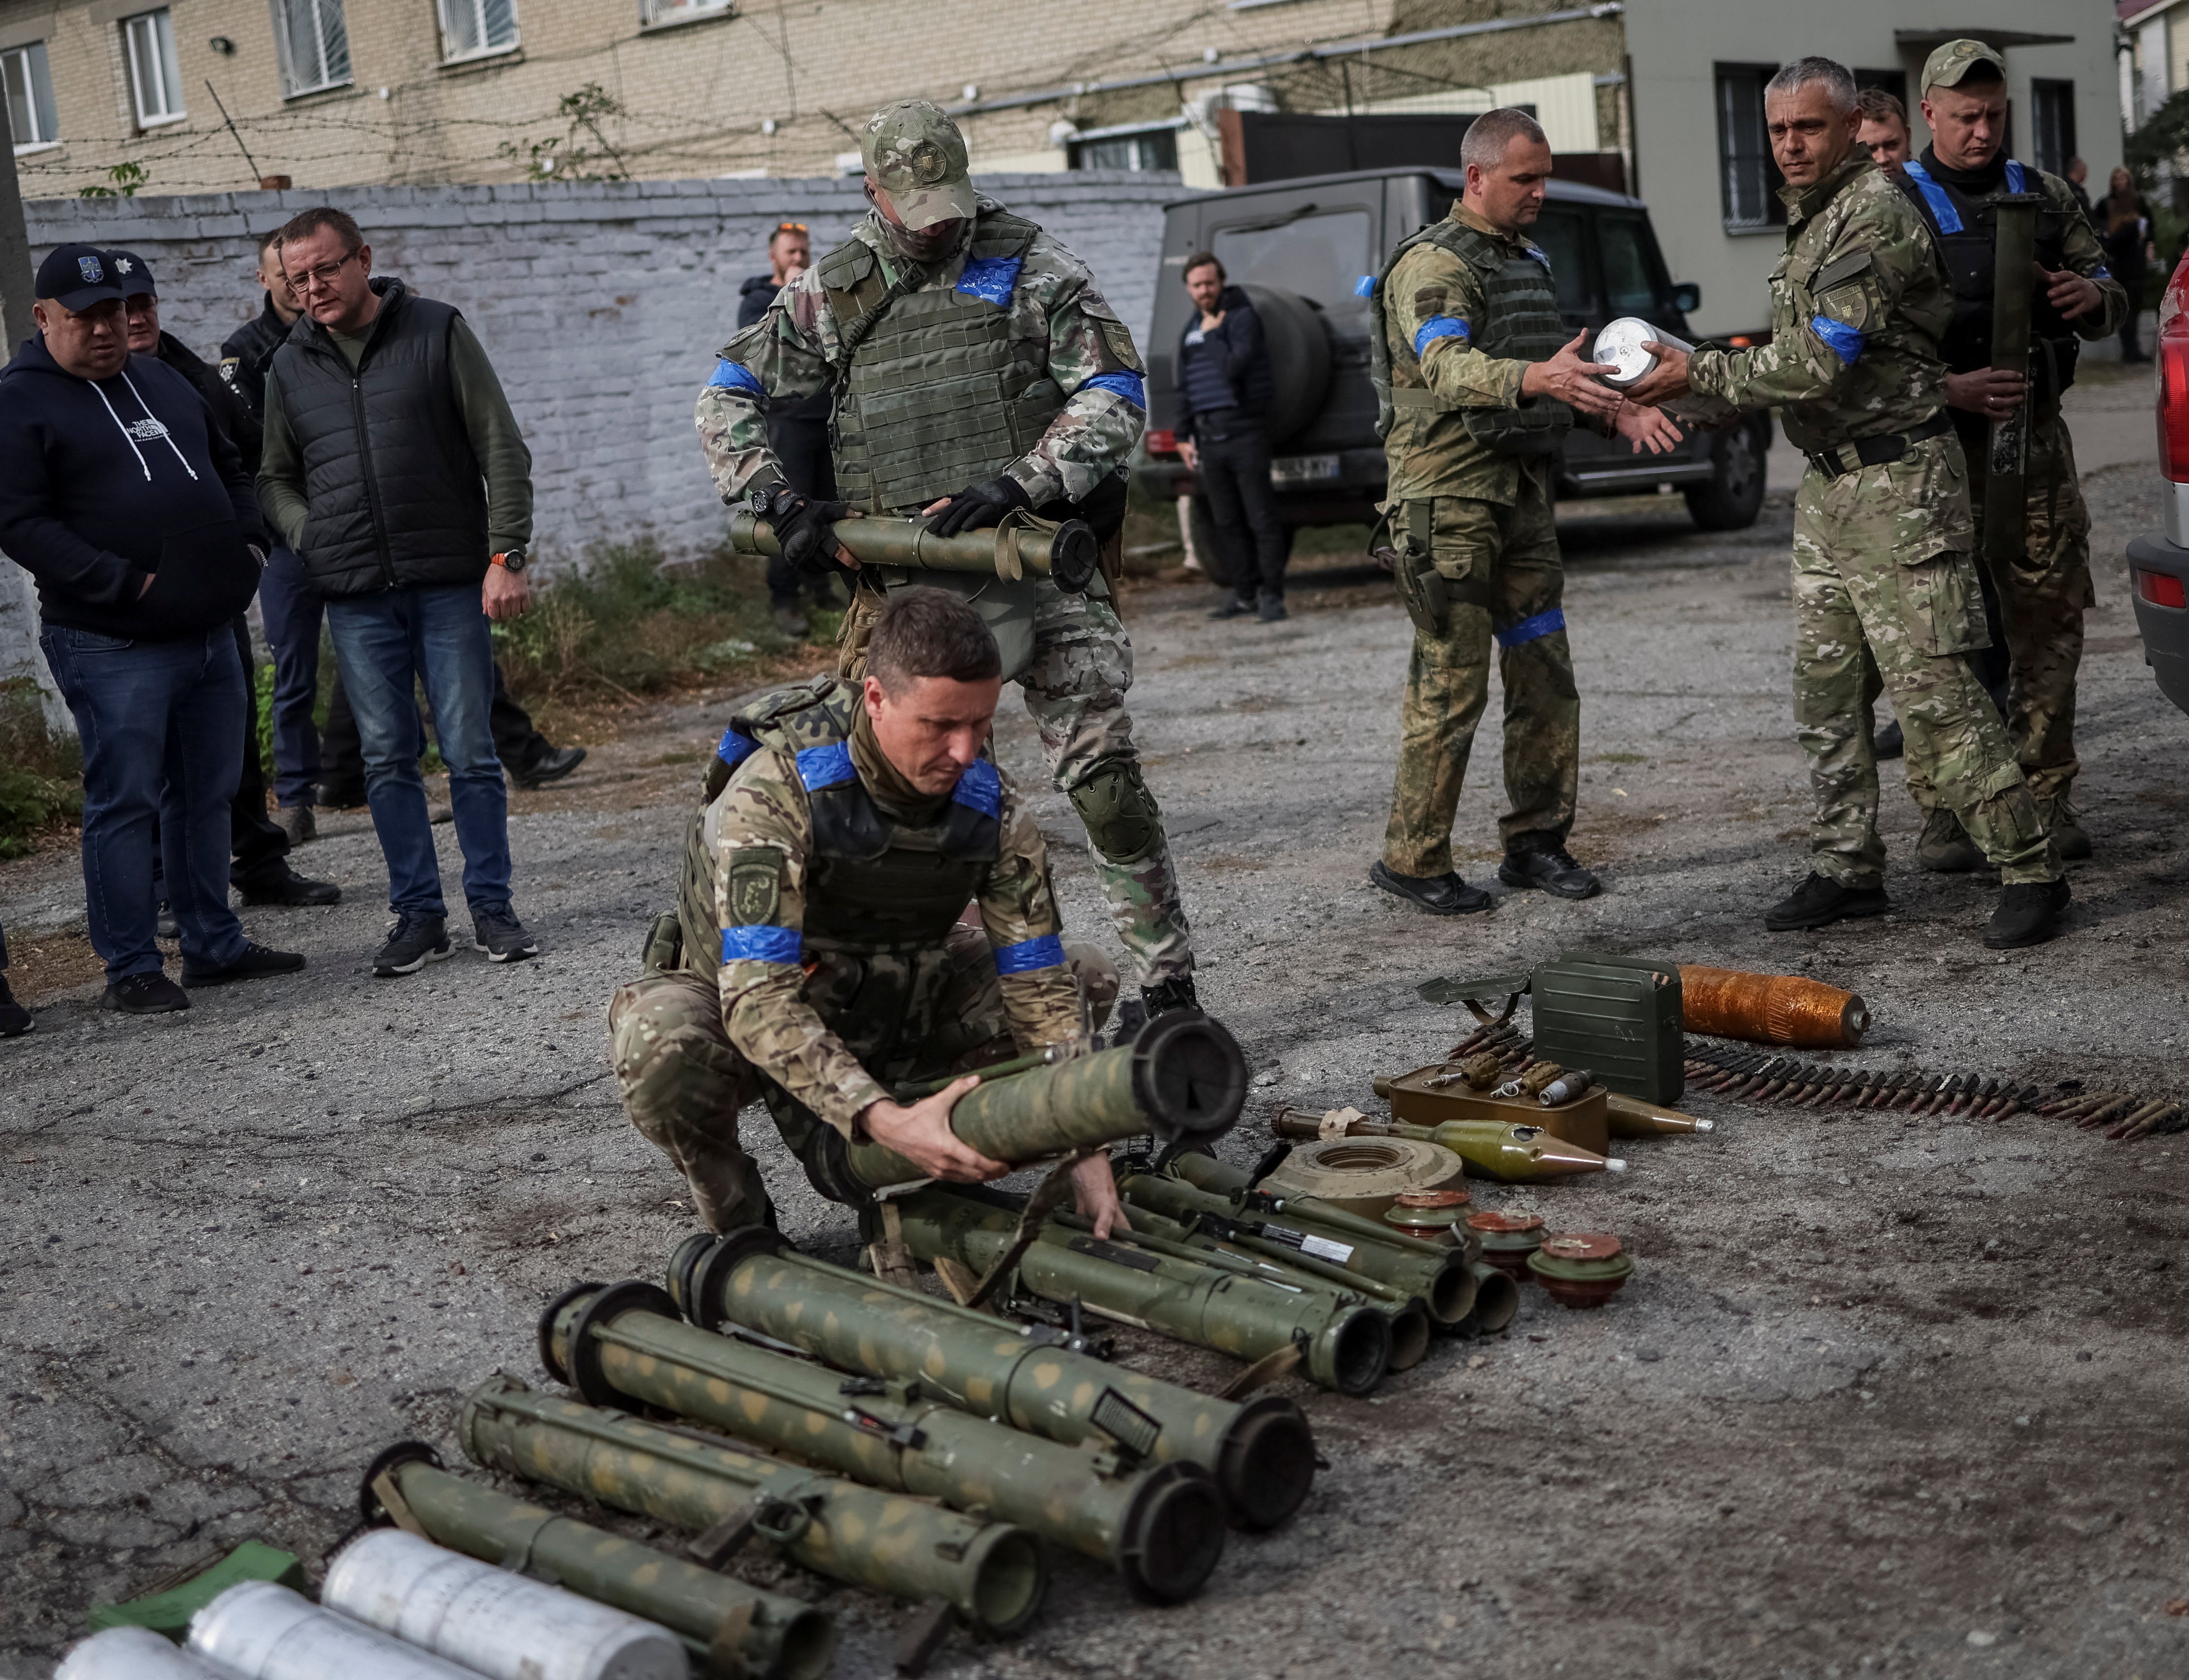 A police sapper sorts unexploded mine shells and weapons after return from the village of Udy, recently liberated by Ukrainian Armed Forces, in the town of Zolochiv, Kharkiv region